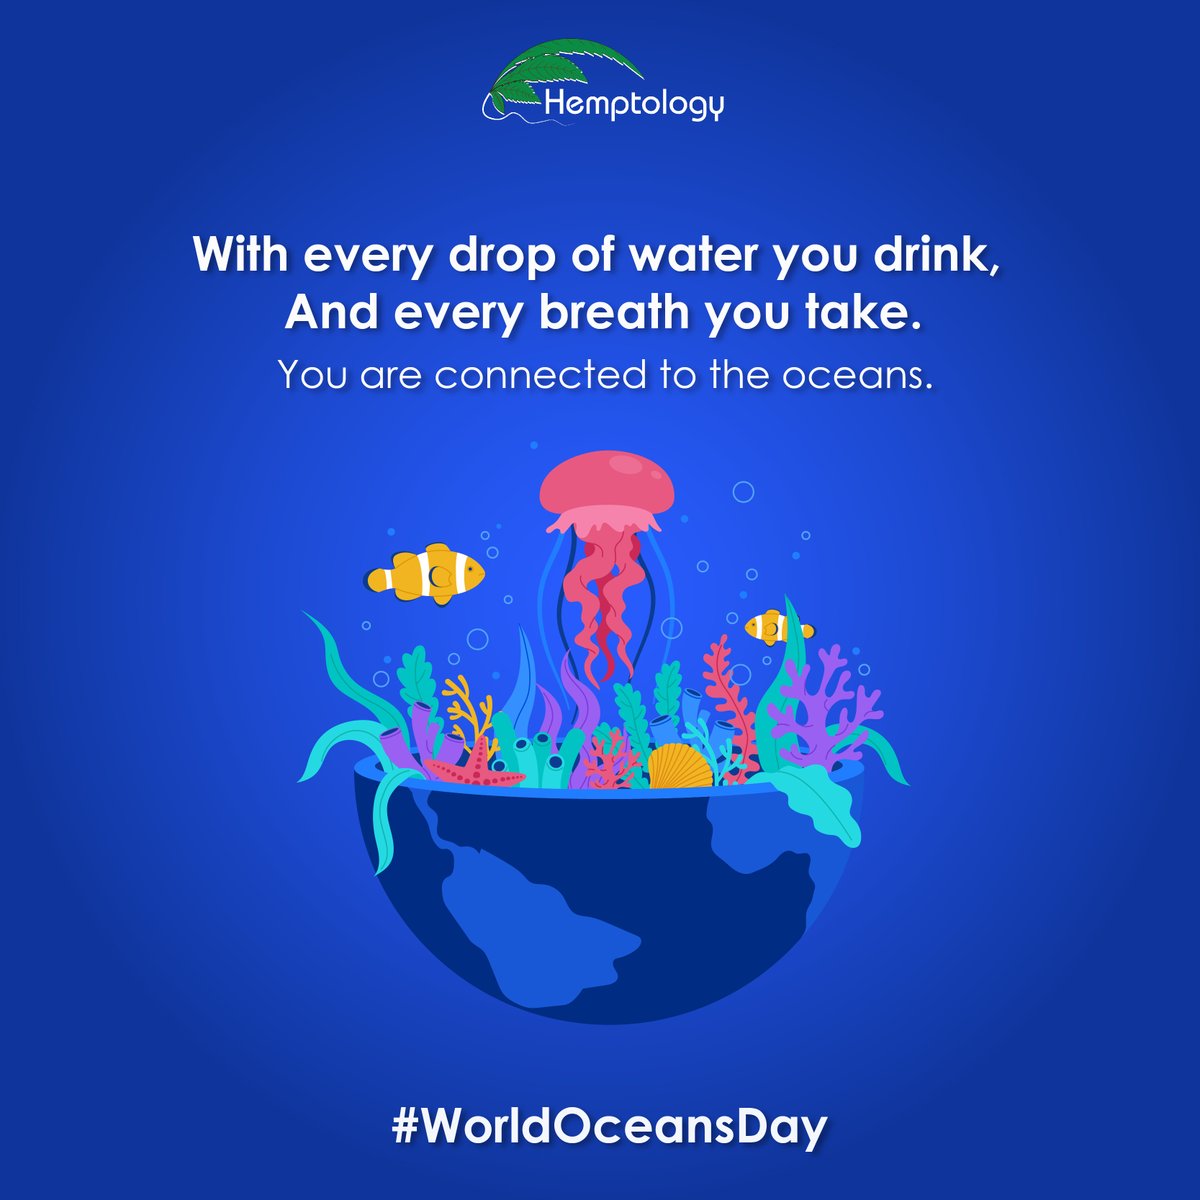 No water = No life. 

Do you know that most of the oxygen in the atmosphere is generated by the oceans?

#ocean #saveoceans #worldoceansday #worldoceansday2021 #saveoceanlife #marinelife #aquaticplants #aquaticlife #savewater #waterpollution #oceanlife #hempcommunity #hemptology